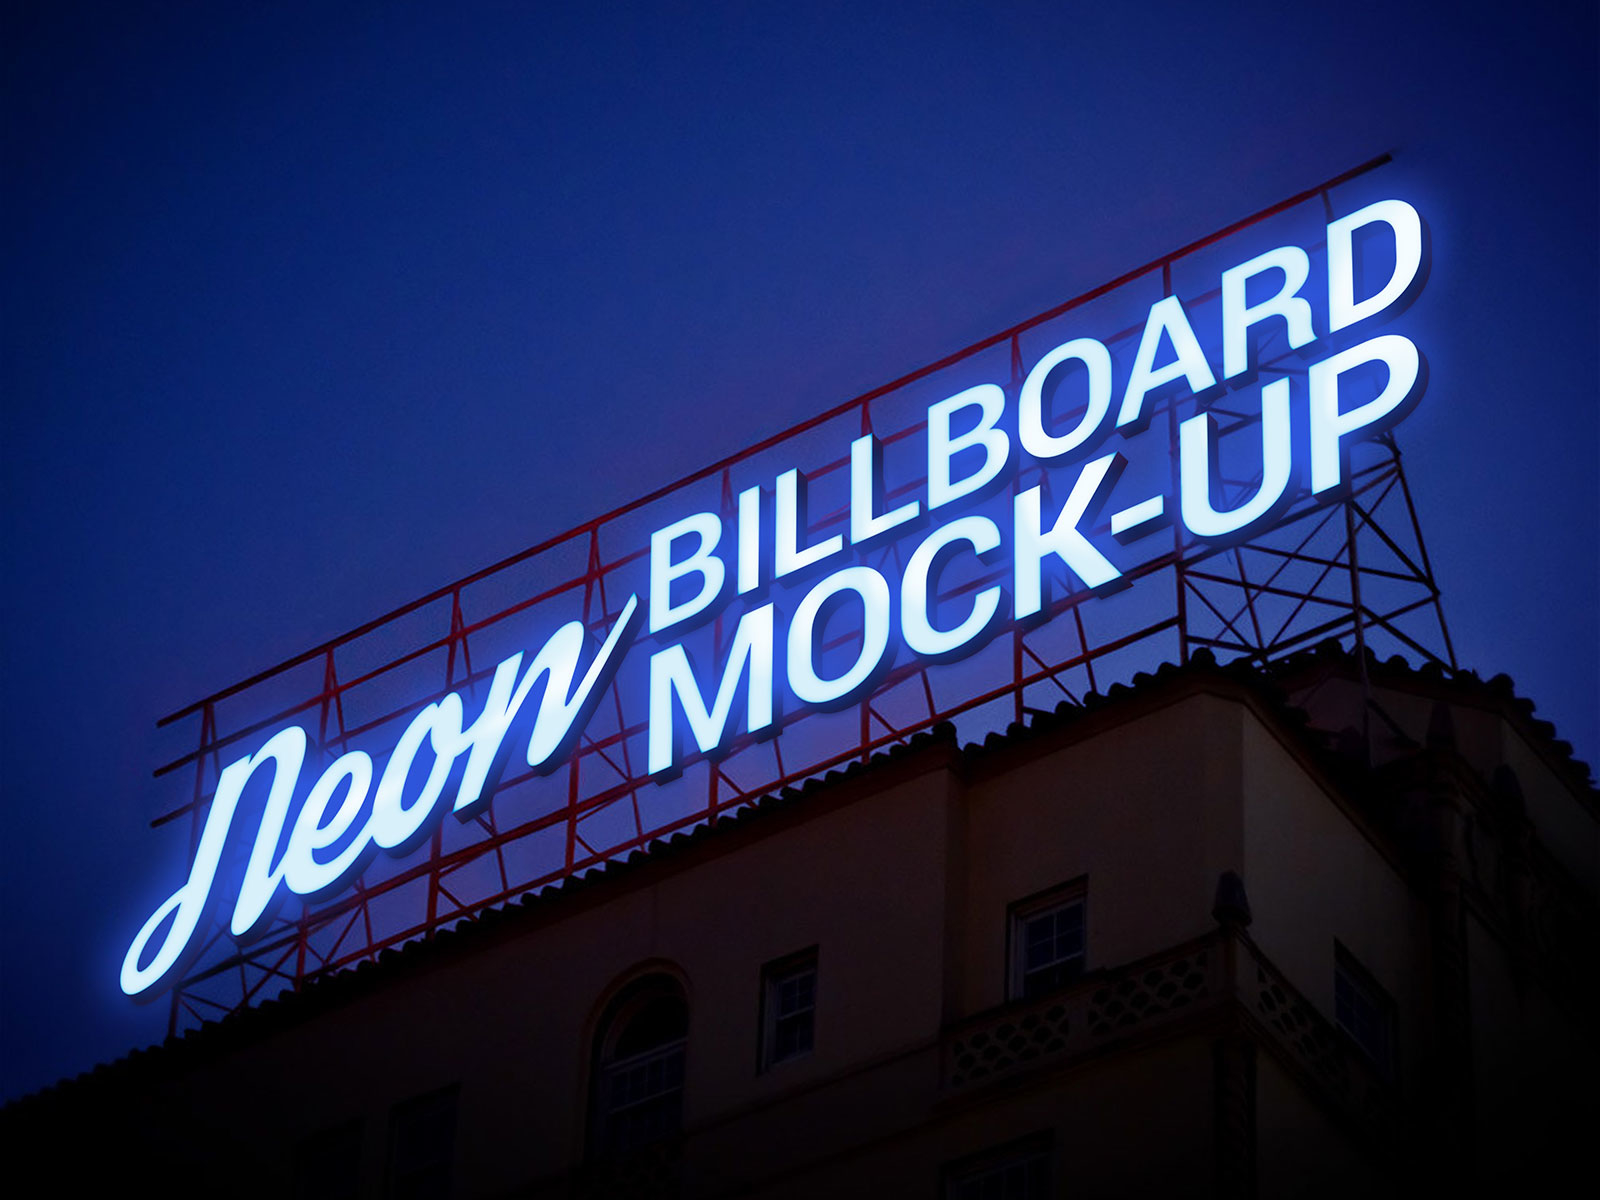 Download Free Electric Neon Sign Billboard Mockup Psd by Zee Que | Designbolts - Dribbble